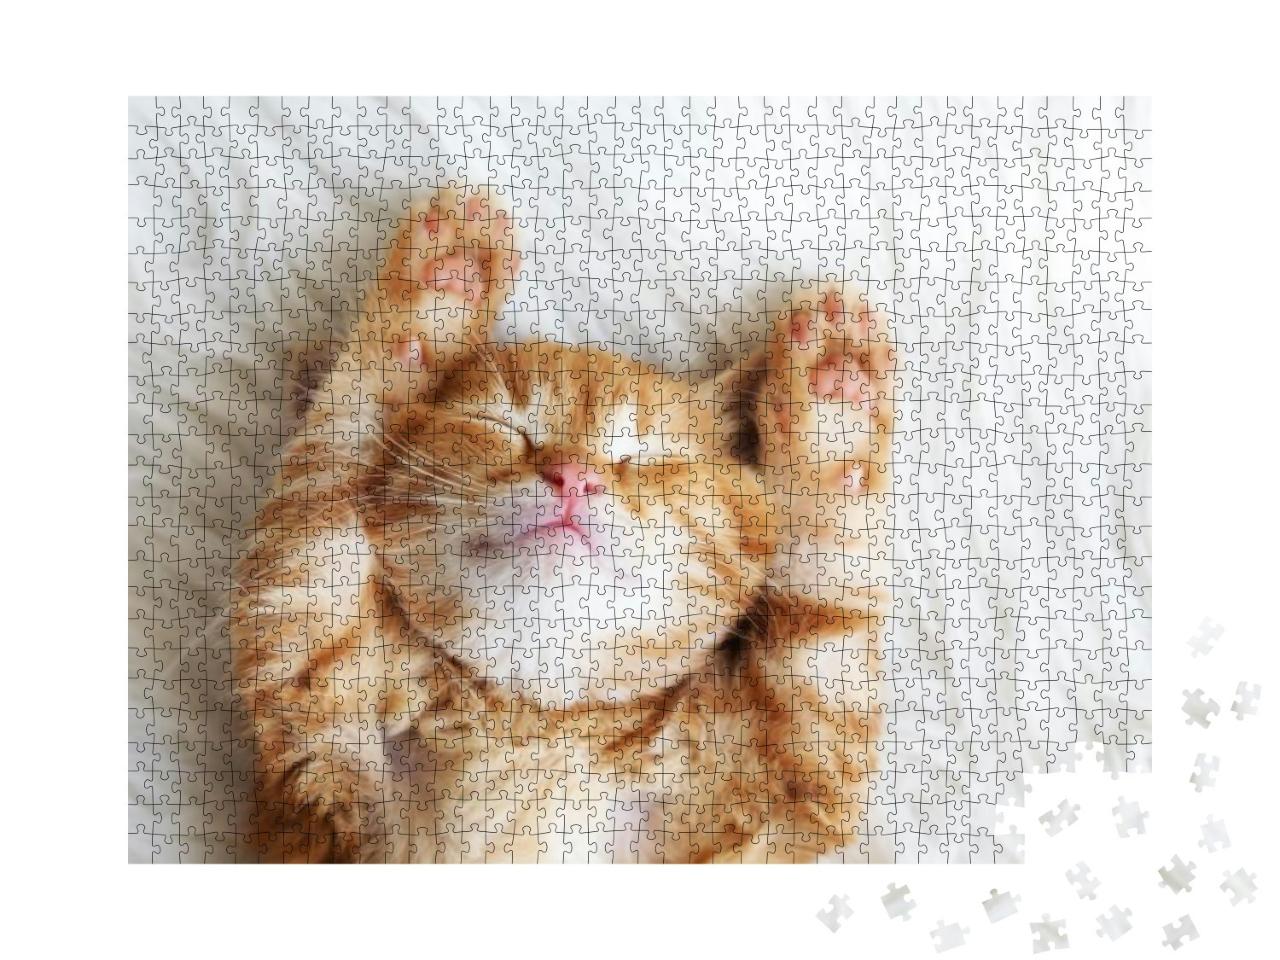 Cute Little Red Kitten Sleeps on Fur White Blanket... Jigsaw Puzzle with 1000 pieces